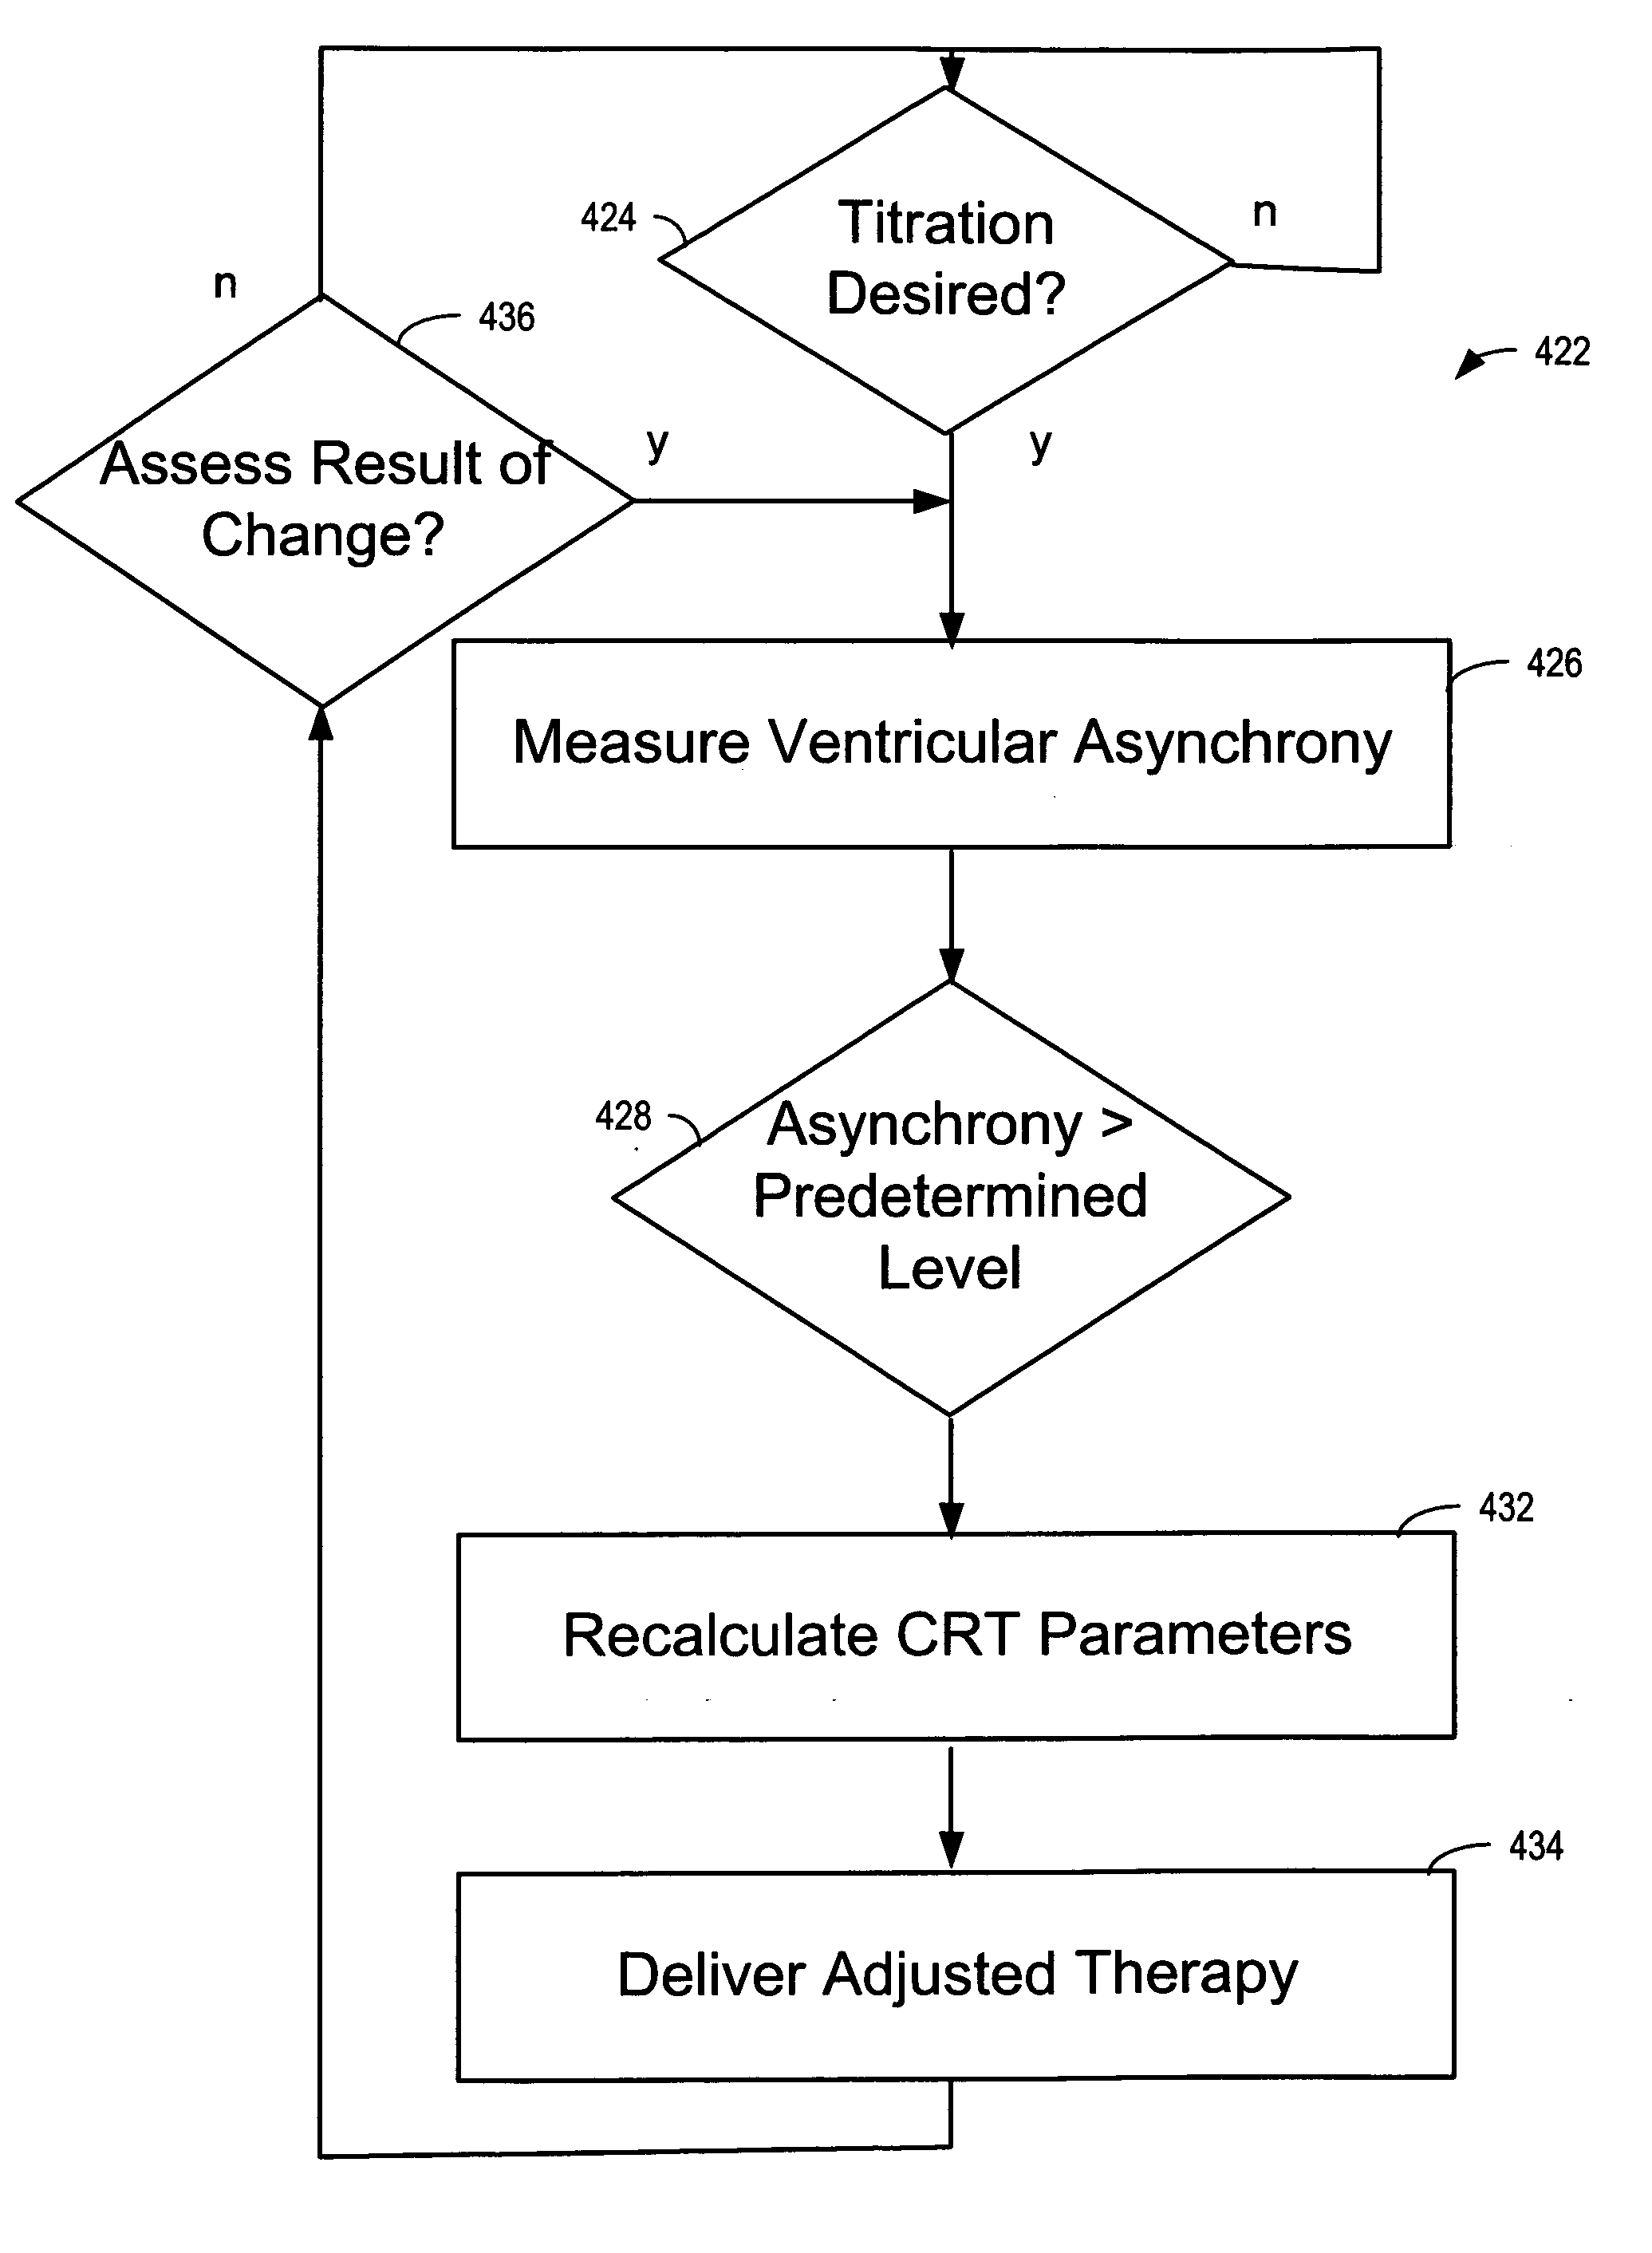 Closed loop cardiac resynchronization therapy using cardiac activation sequence information